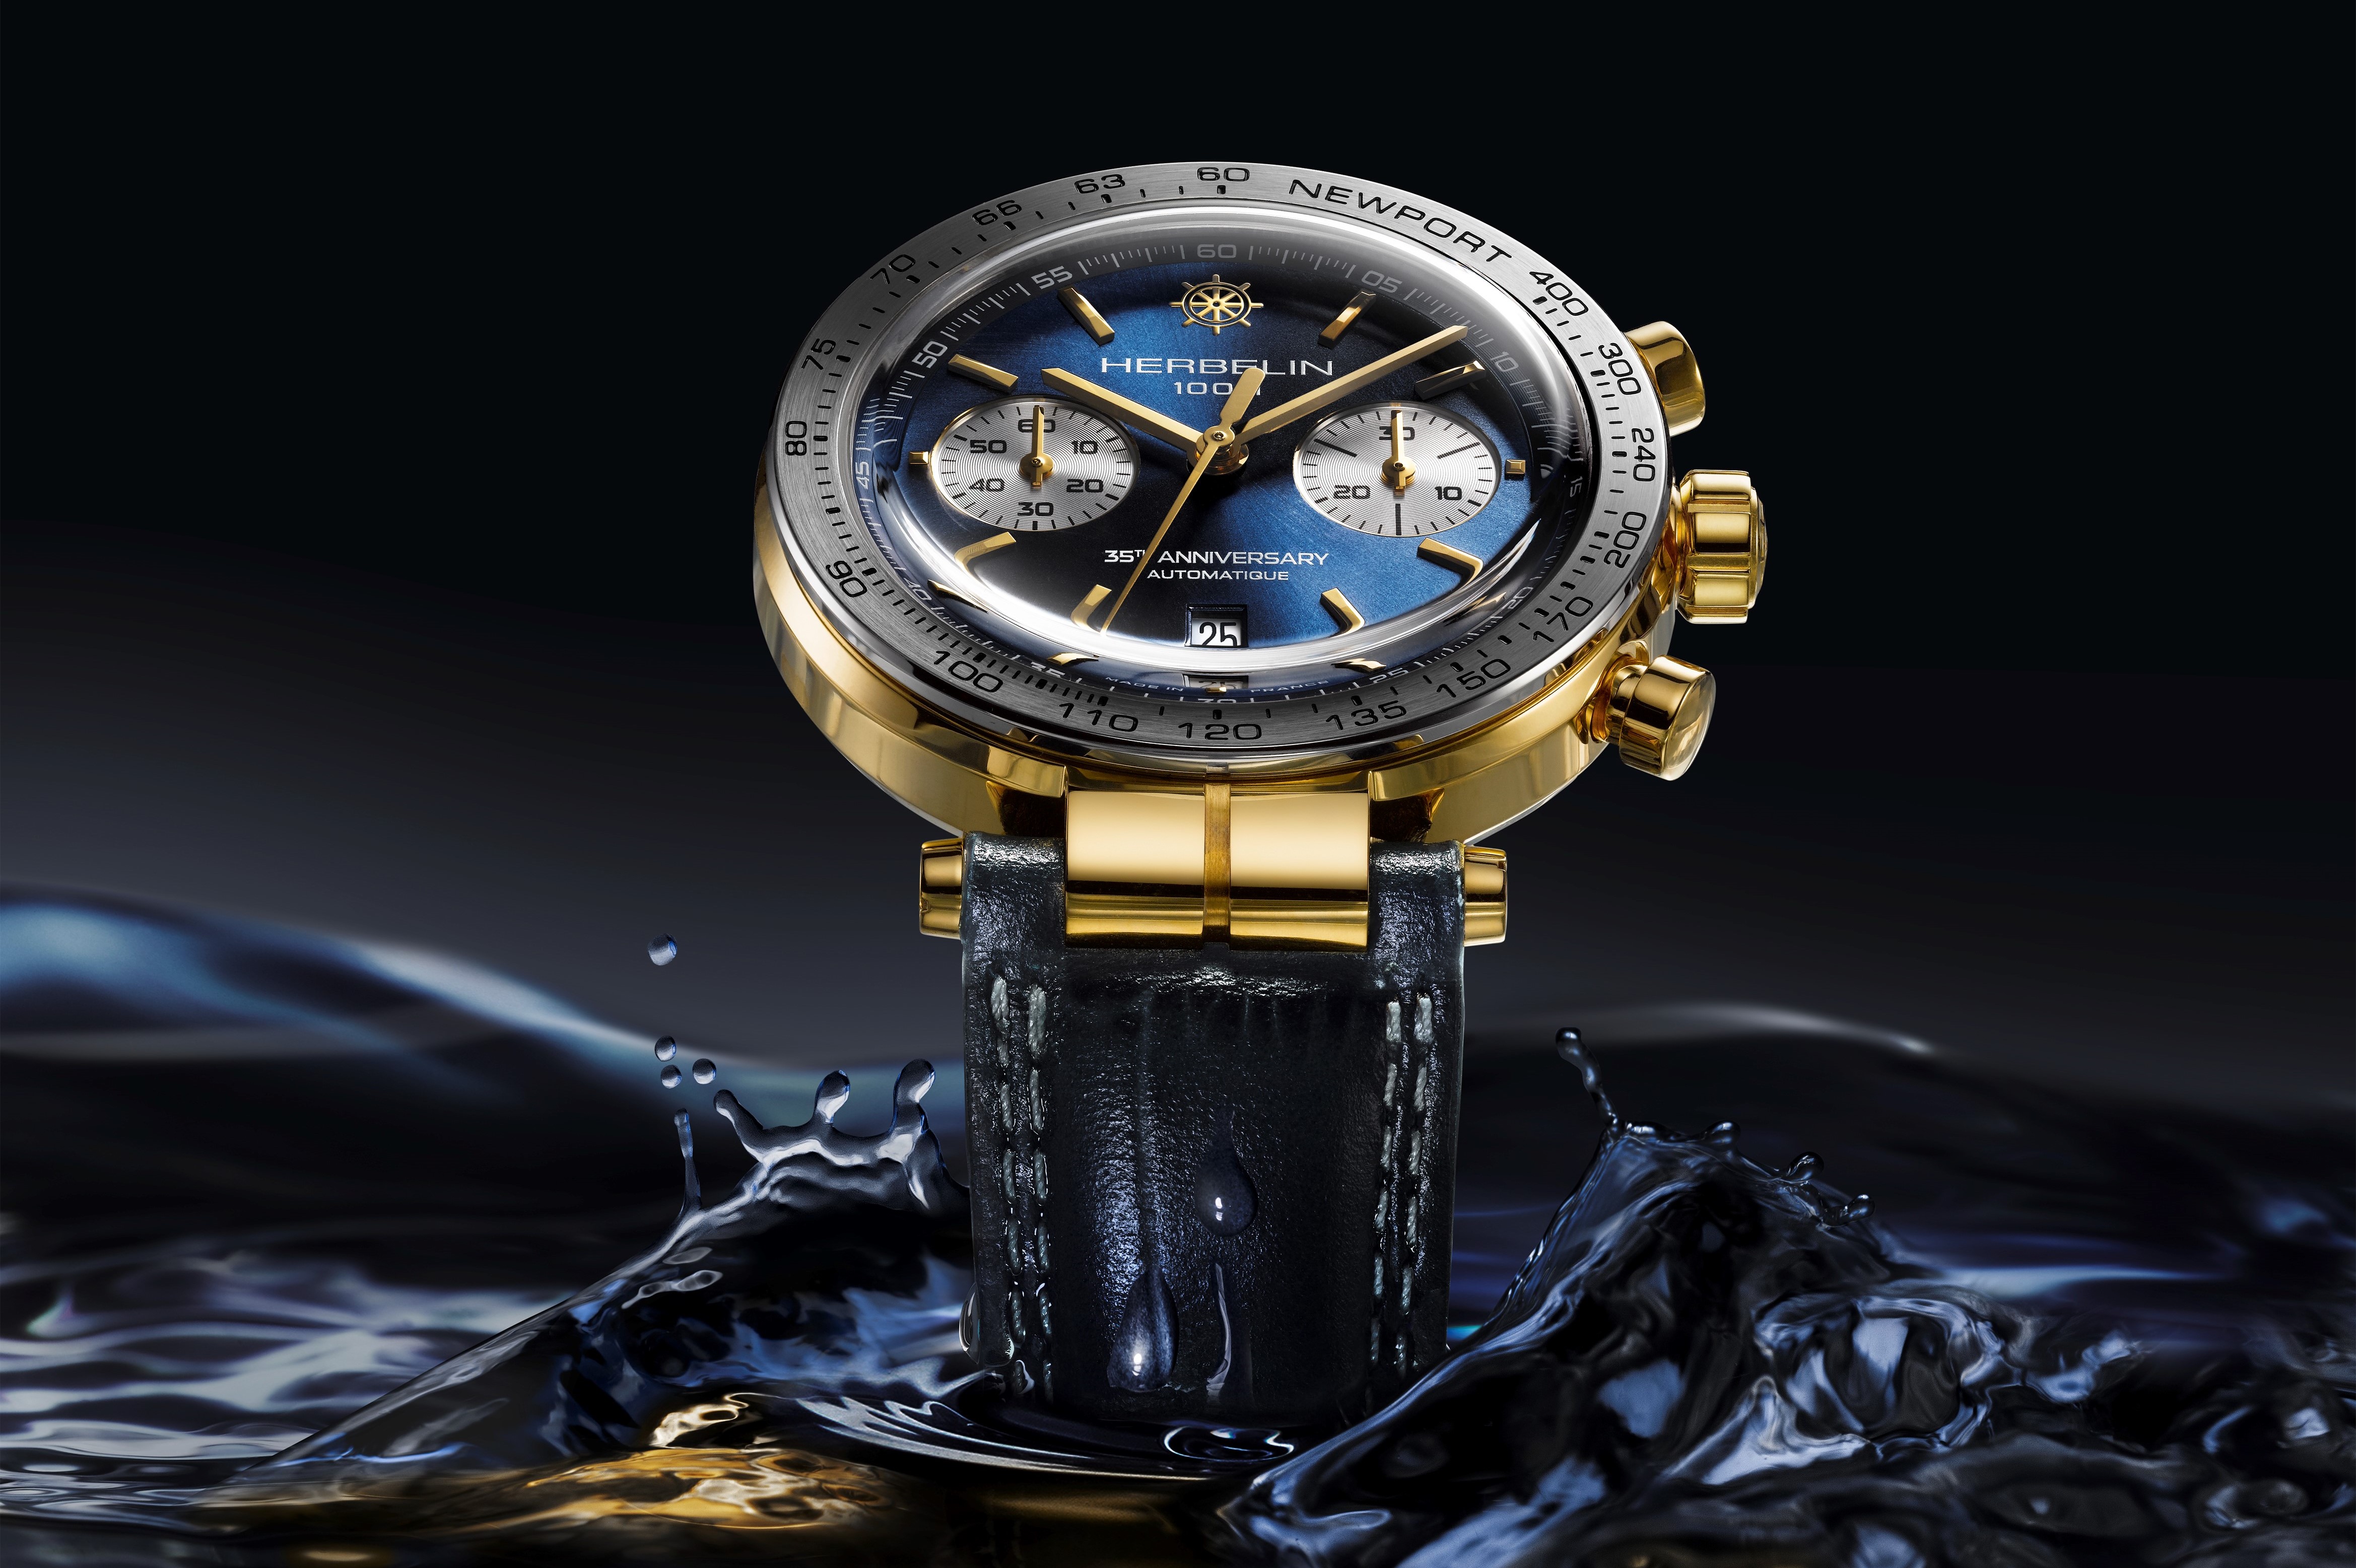 limited edition Newport Chronograph Automatic 35th Anniversary